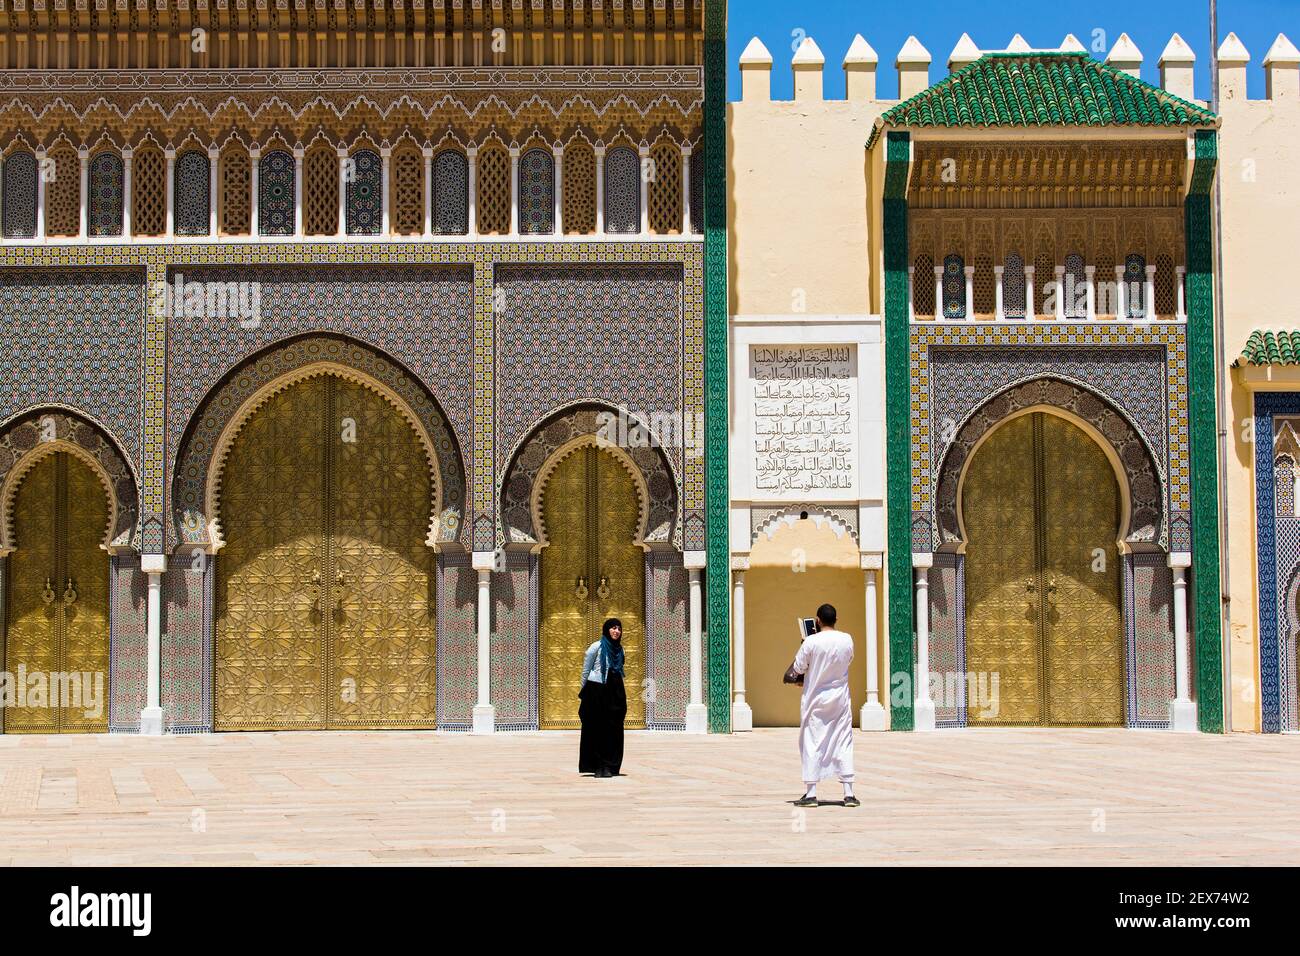 Morocco, Fez, Dar el-Makhzen, exterior of  the royal palace in Fez, Moorish architecture Stock Photo